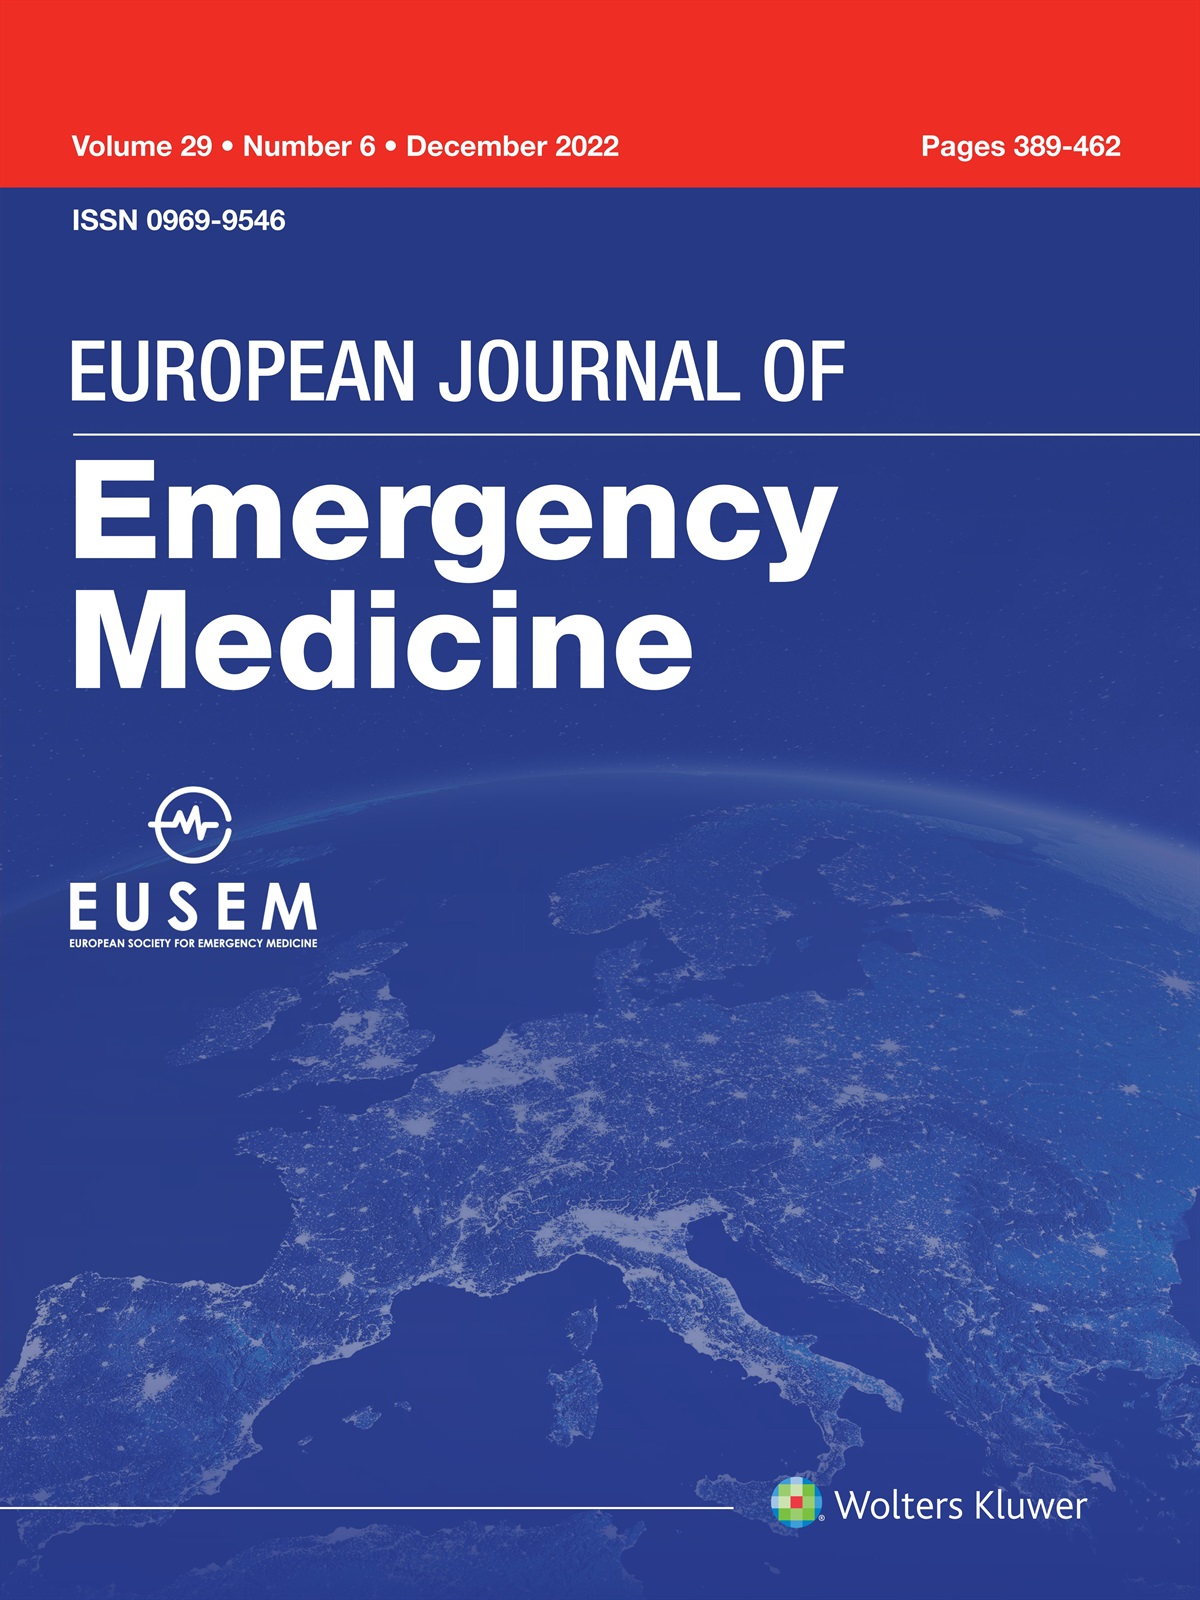 Role of emergency departments and emergency physicians in expanding clinical knowledge on drug-related events